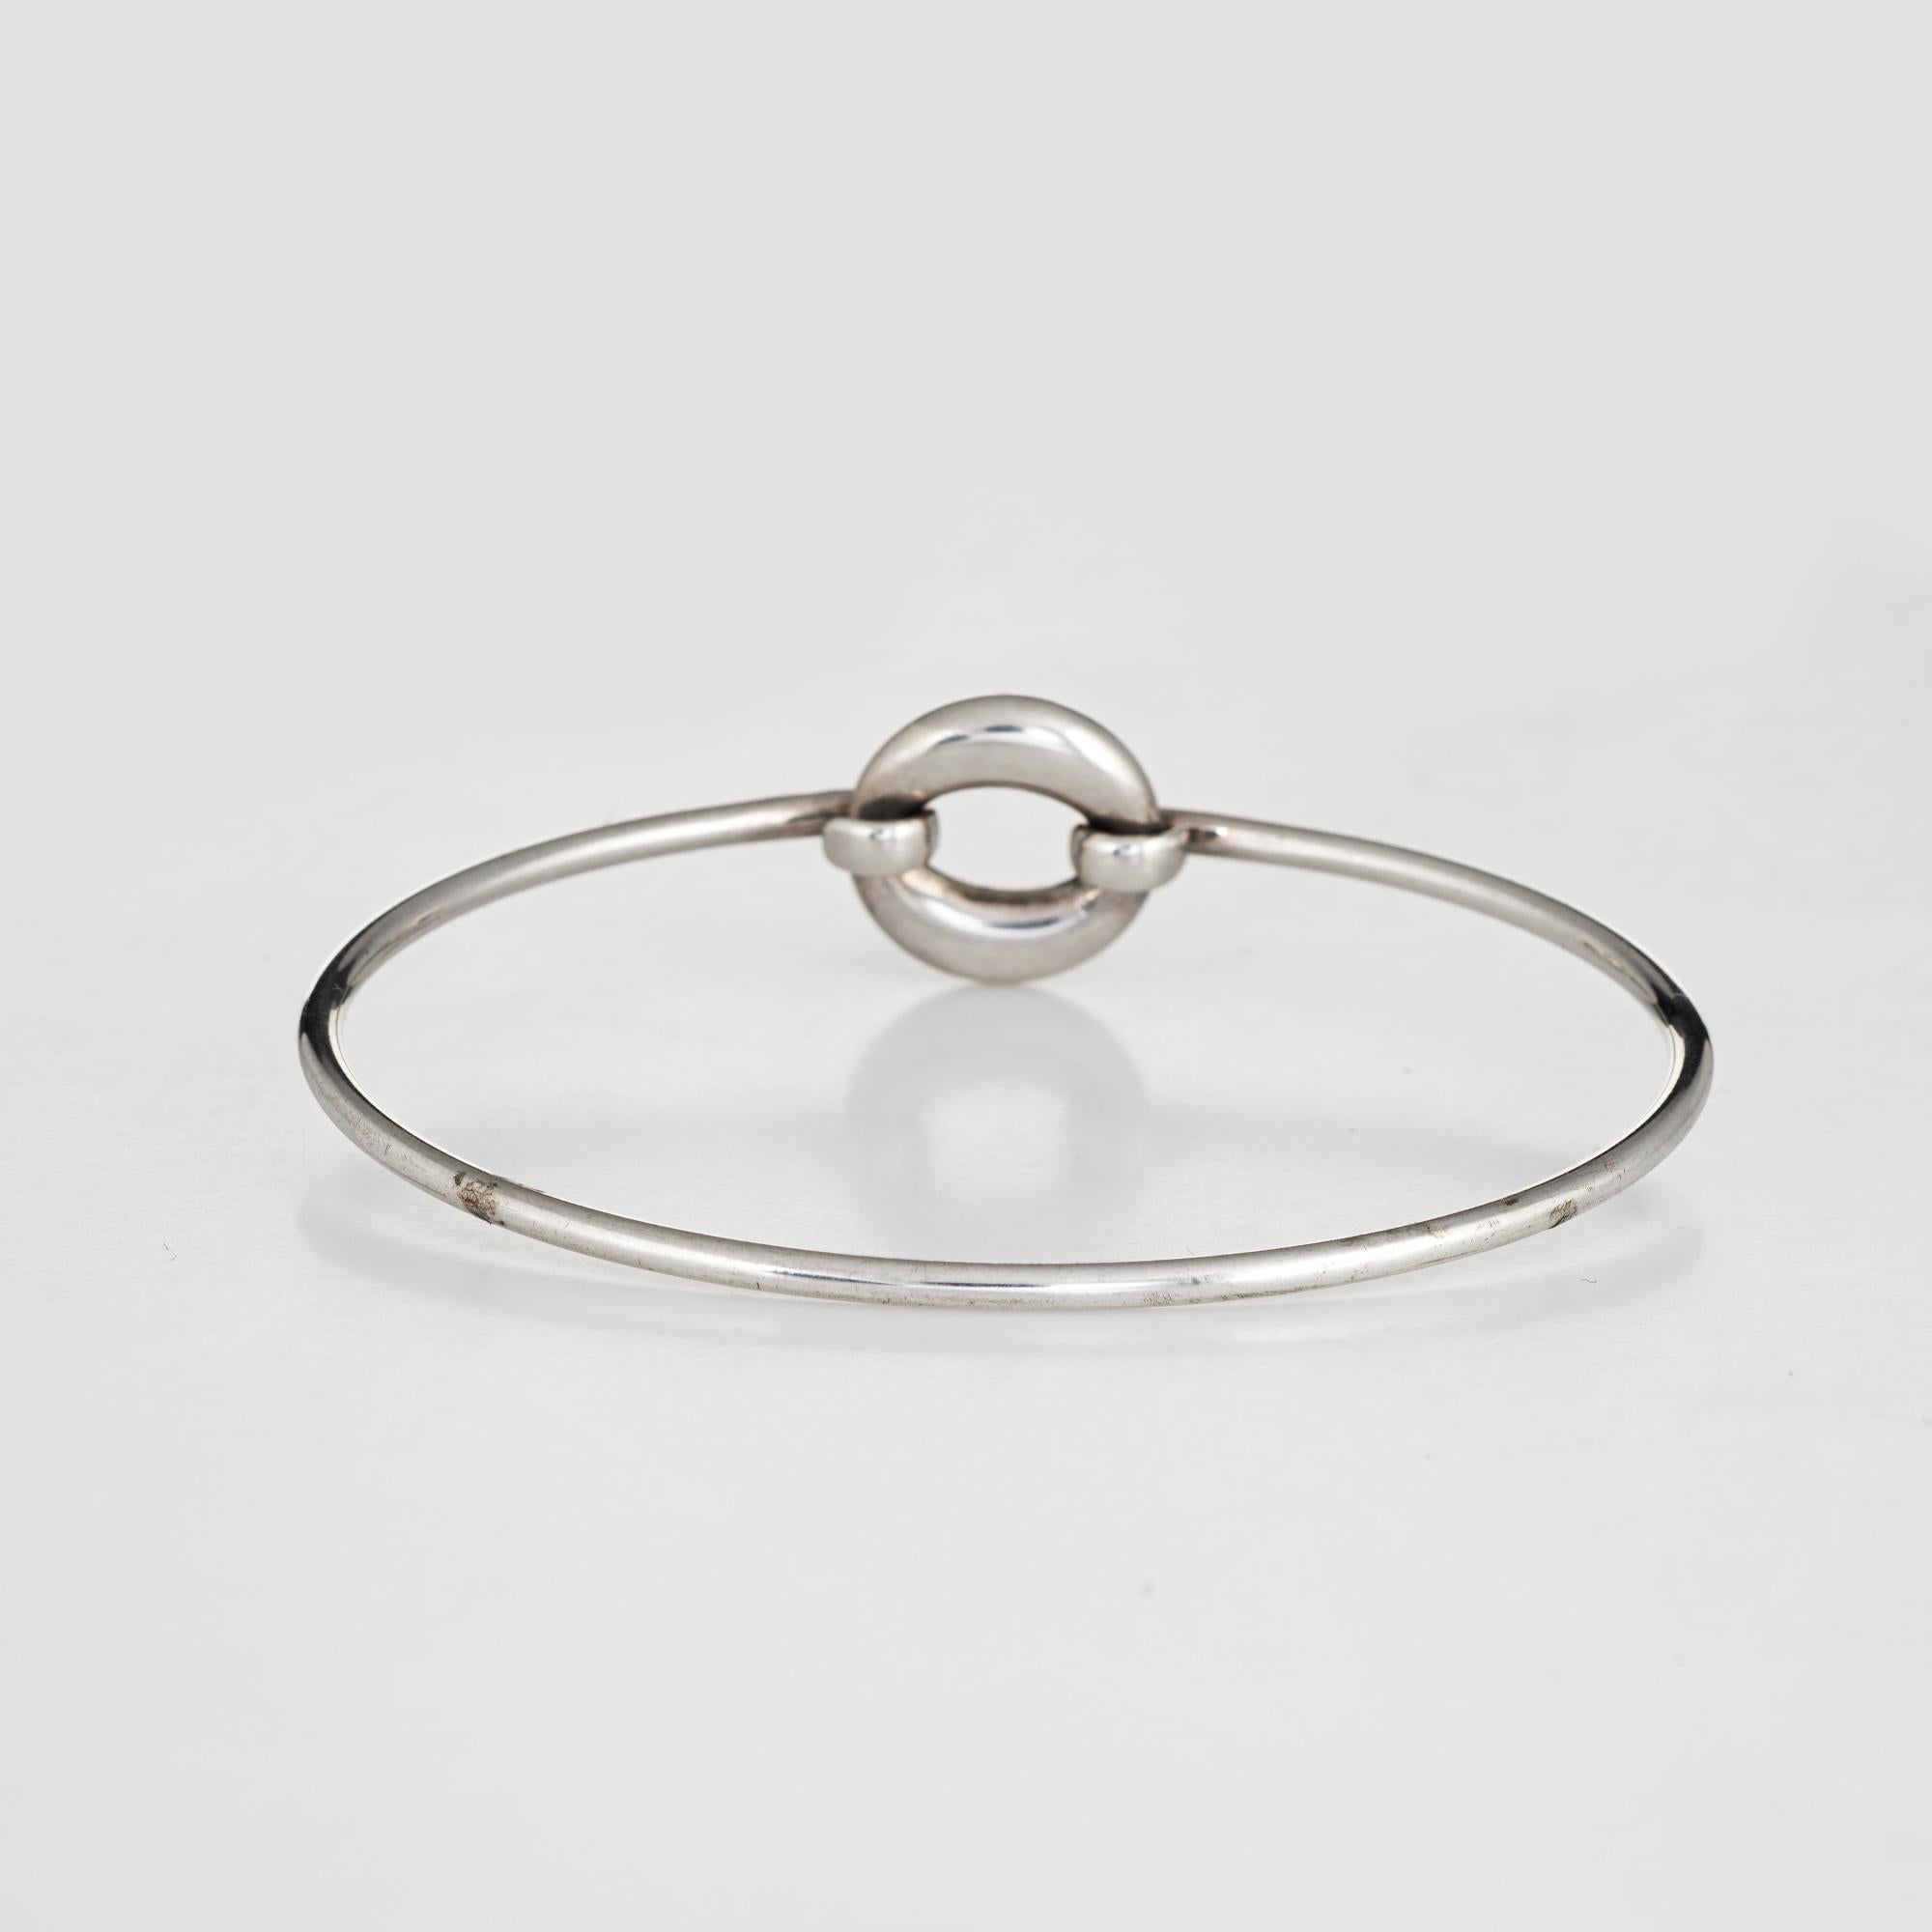 Stylish Tiffany & Co bangle bracelet crafted in 925 sterling silver. 

The bangle is designed by Elsa Peretti with a 